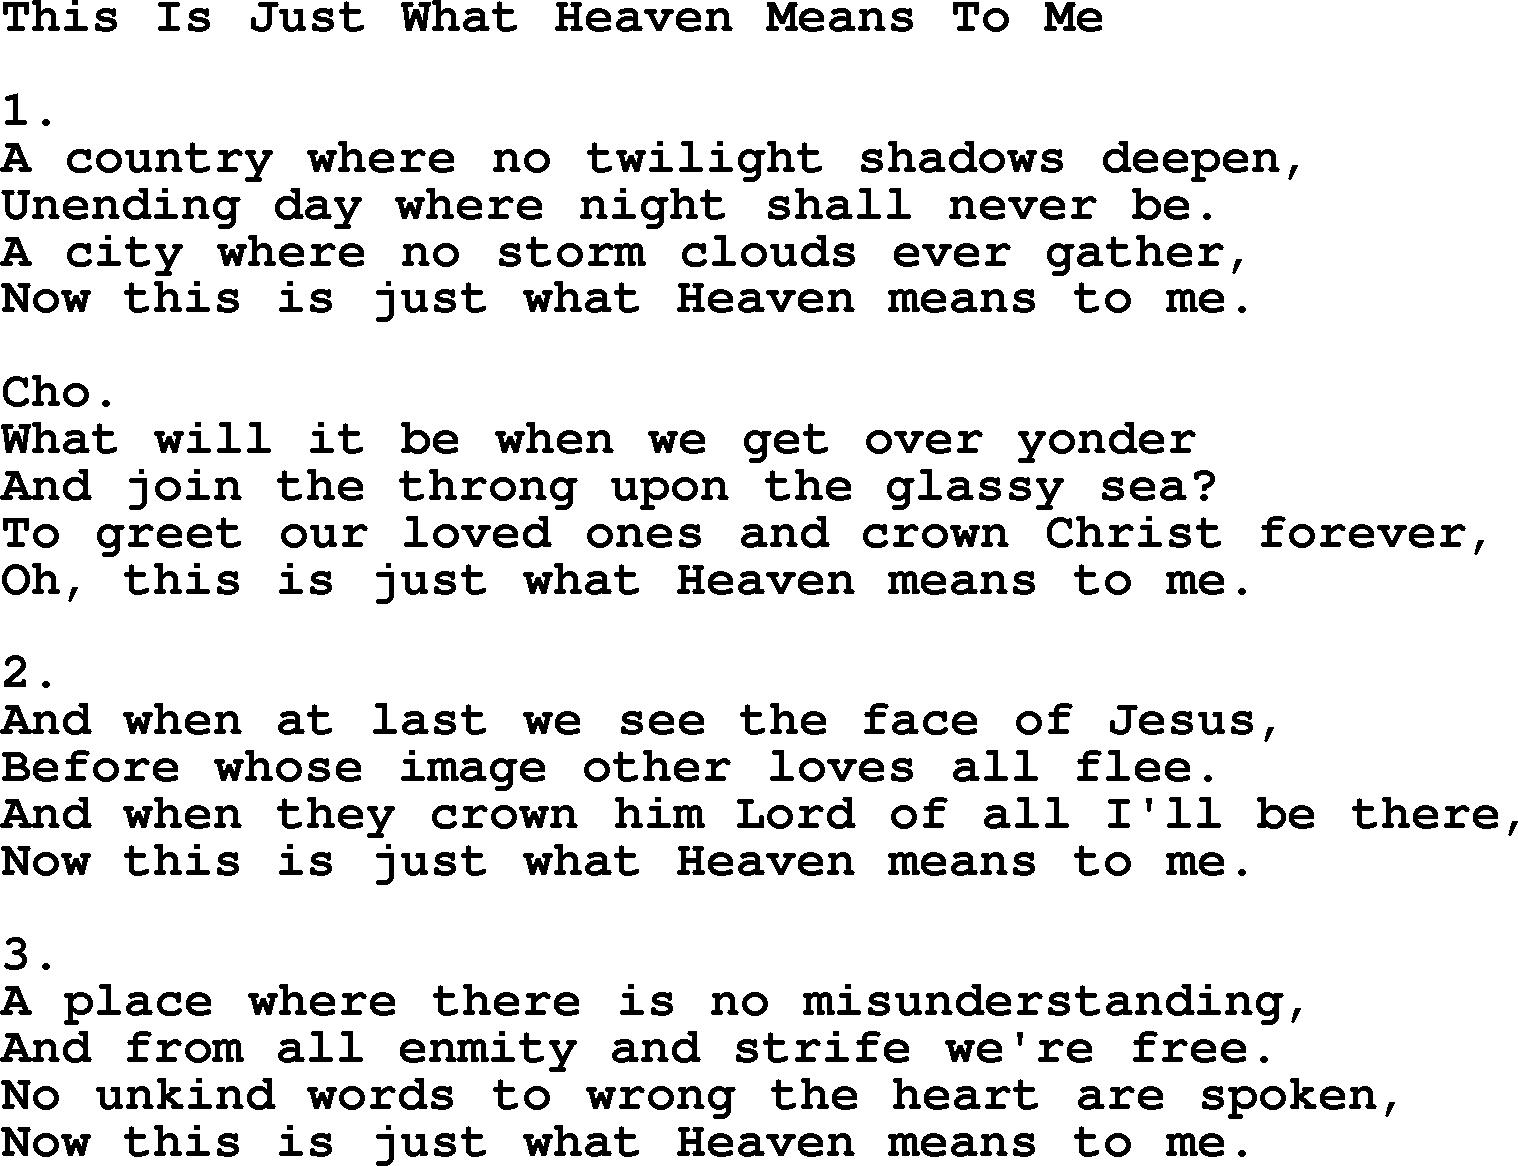 Apostolic & Pentecostal Hymns and Songs, Hymn: This Is Just What Heaven Means To Me lyrics and PDF